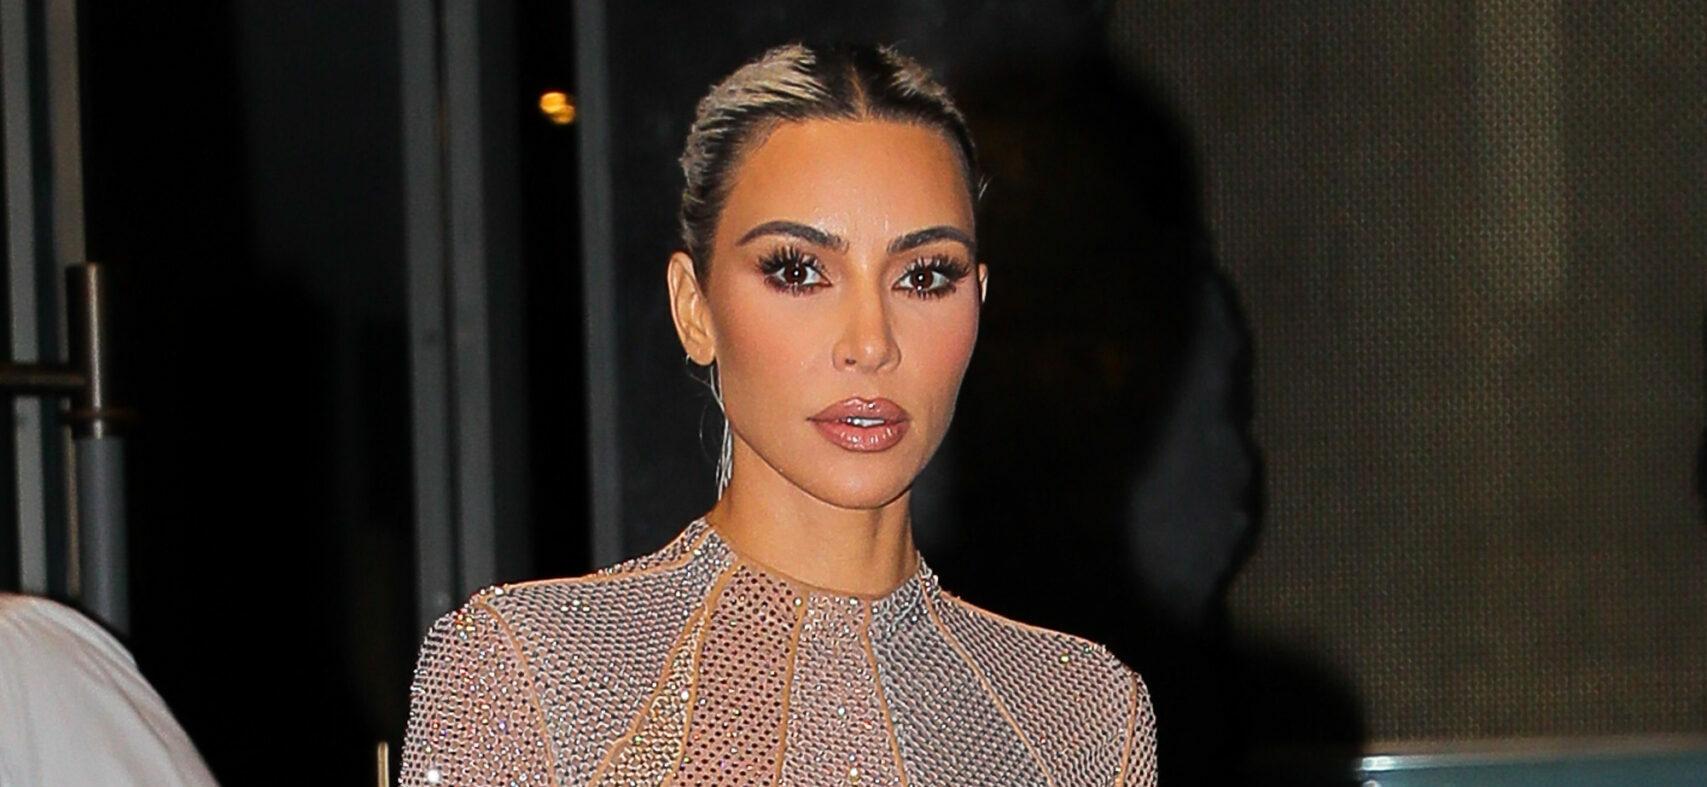 Kim Kardashian Accused Of Taking Roles Away From Working Actors Over ‘AHS’ Casting